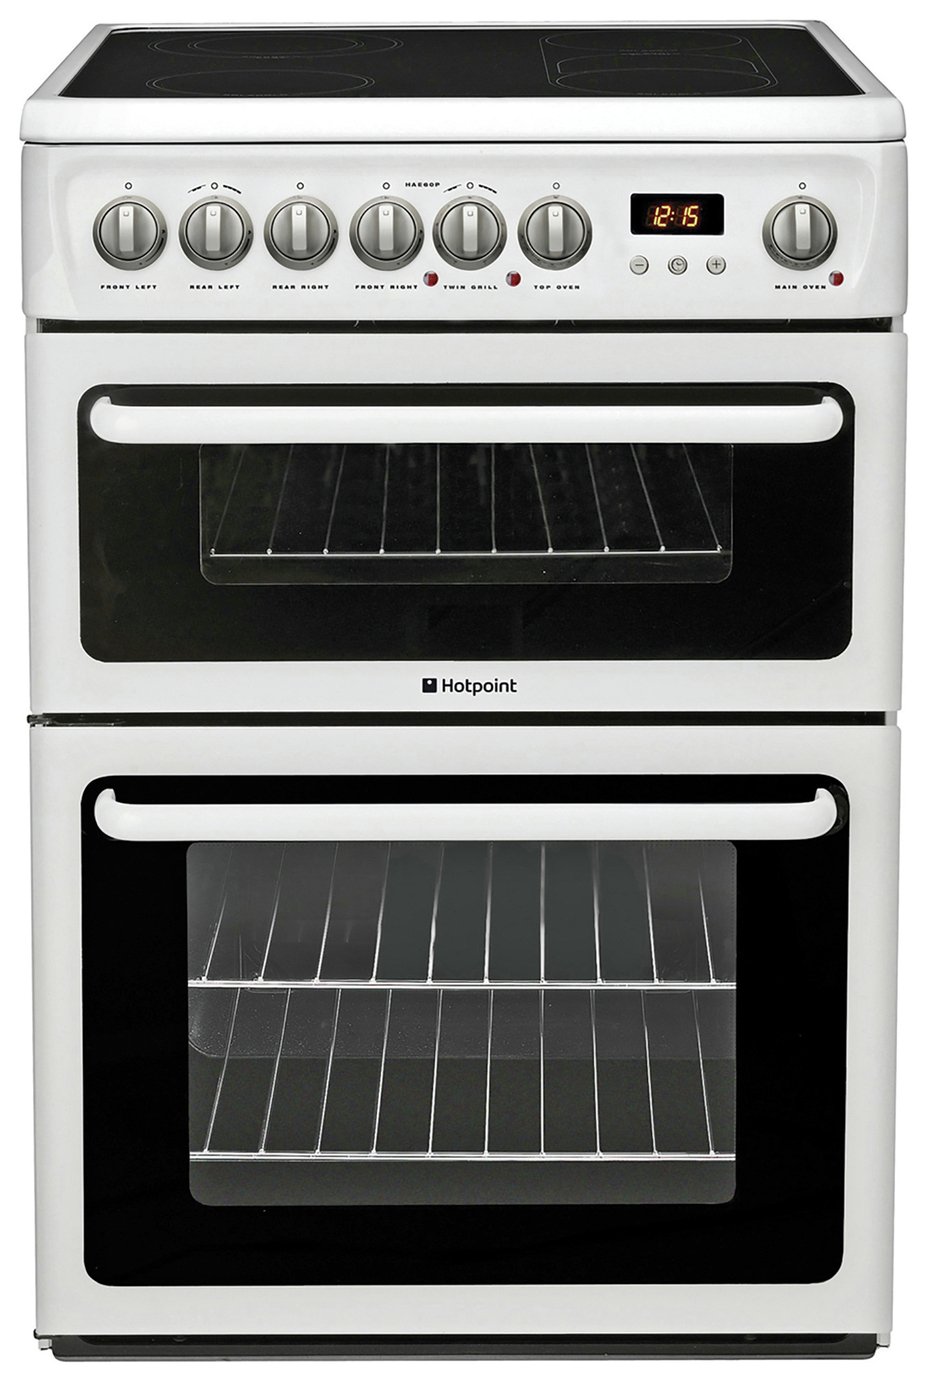 Hotpoint HAE60P 60cm Double Oven Electric Cooker - White